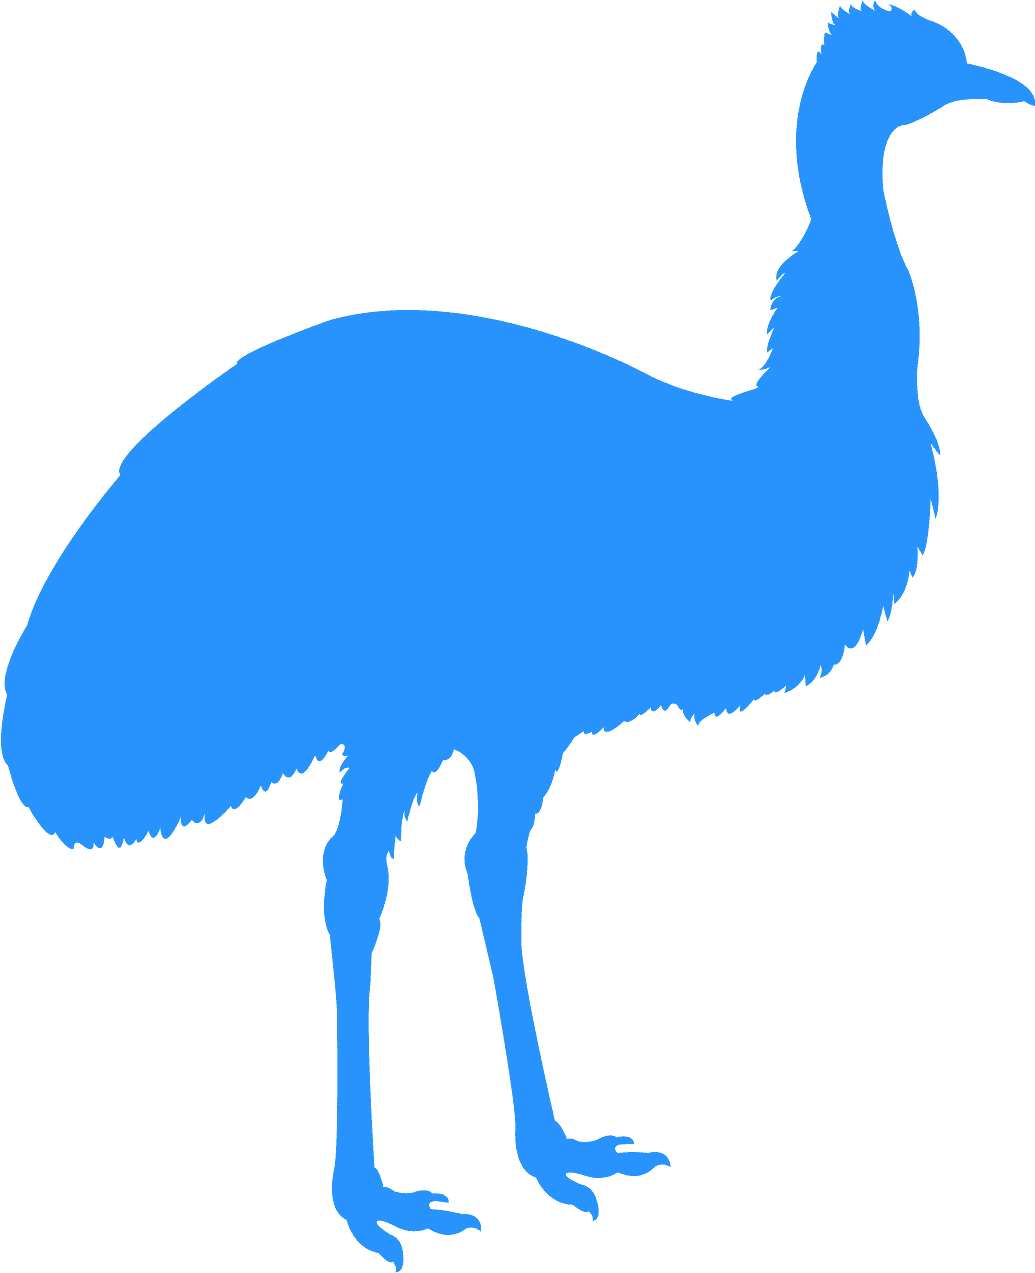 Blue Emu Silhouette Graphic PNG